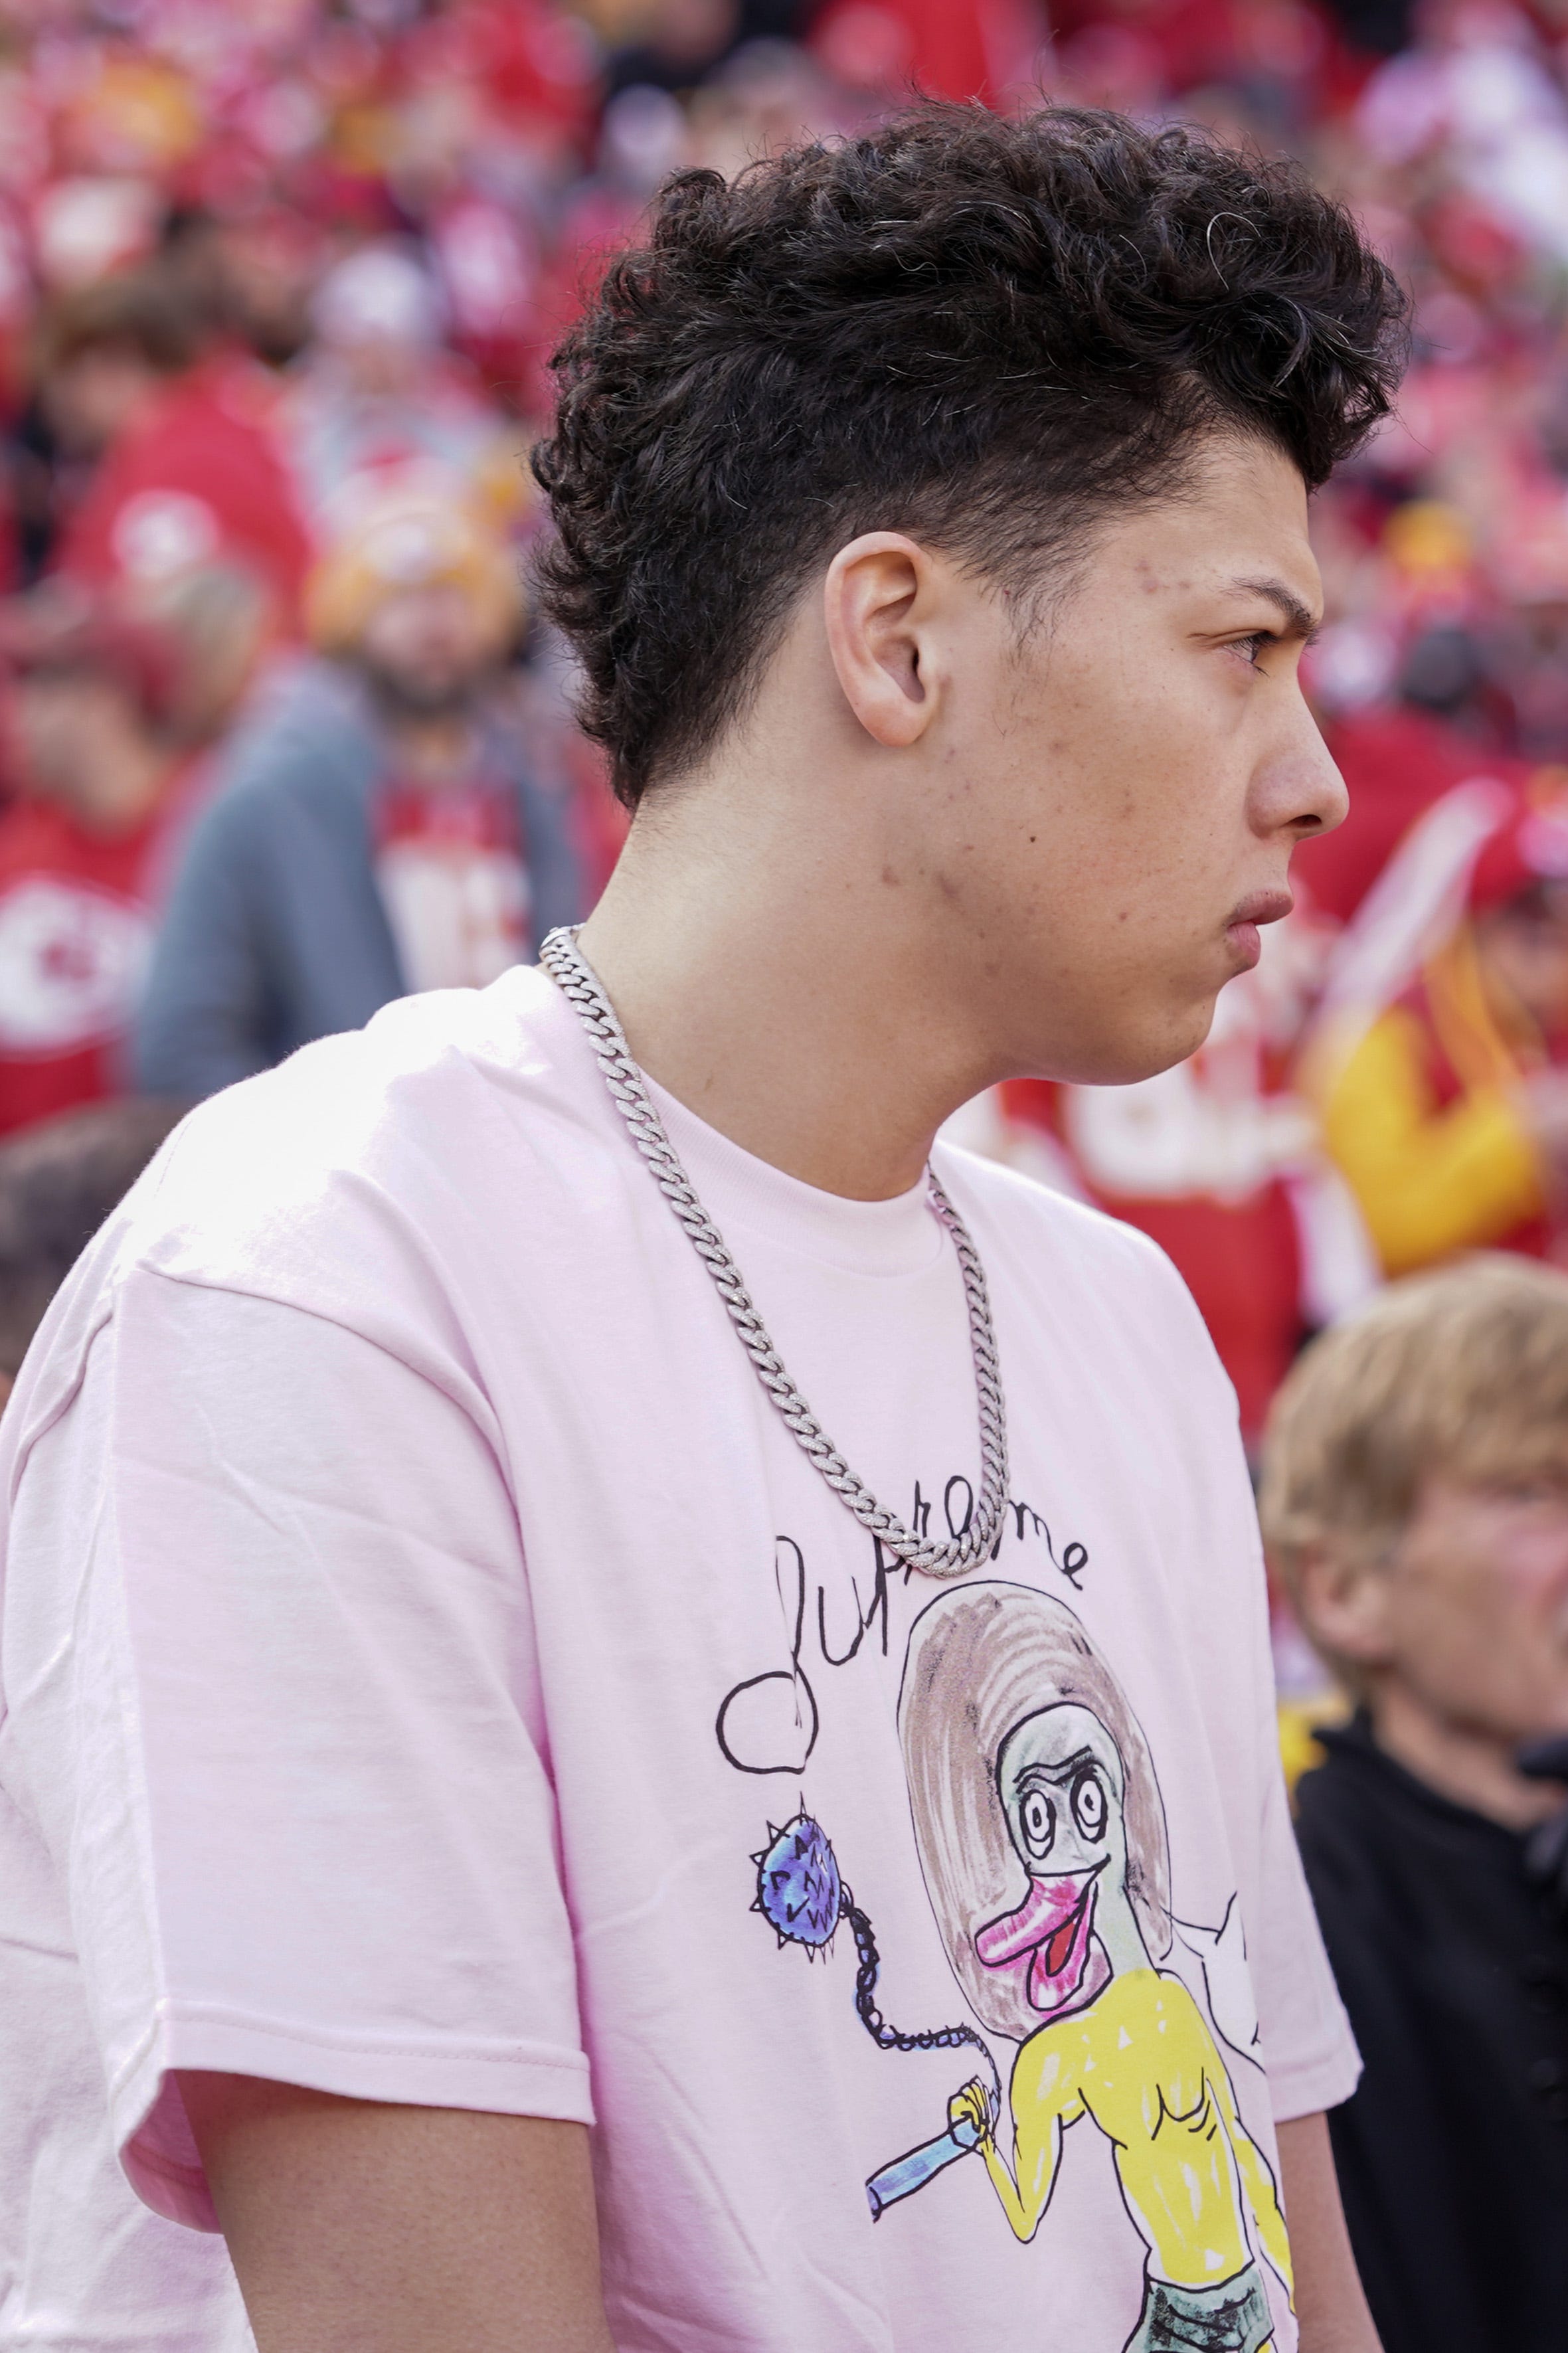 Jackson Mahomes accused of assault by restaurant owner and waiter